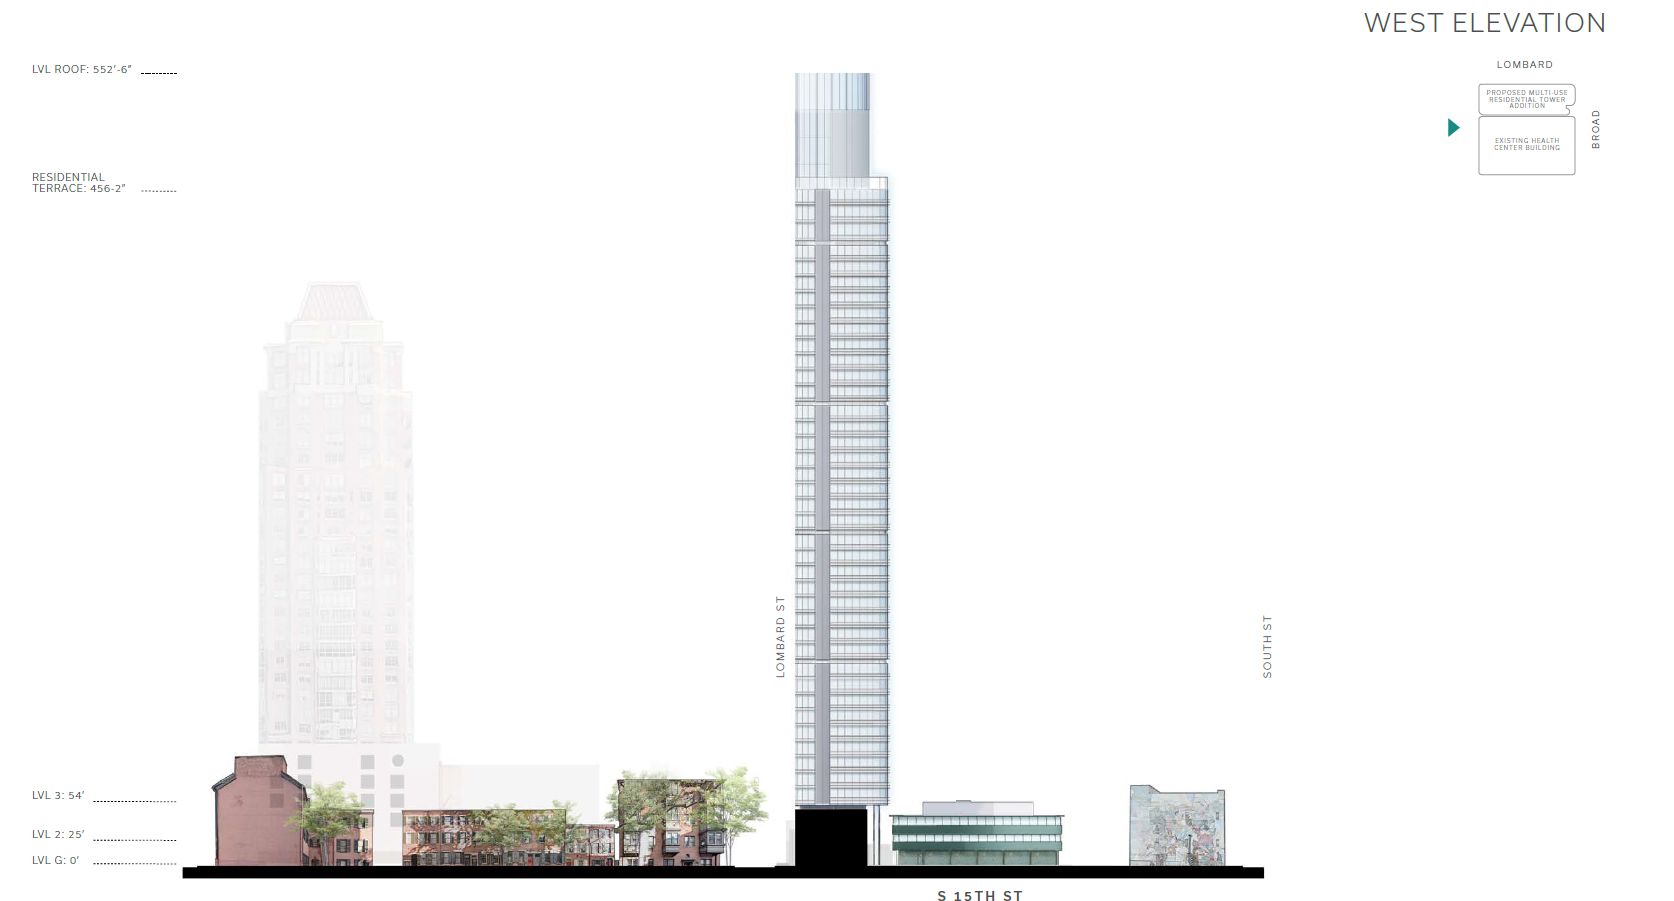 Broad and Lombard at 500 South Broad Street. Credit: SITIO Architecture + Urbanism via the Civic Design Review